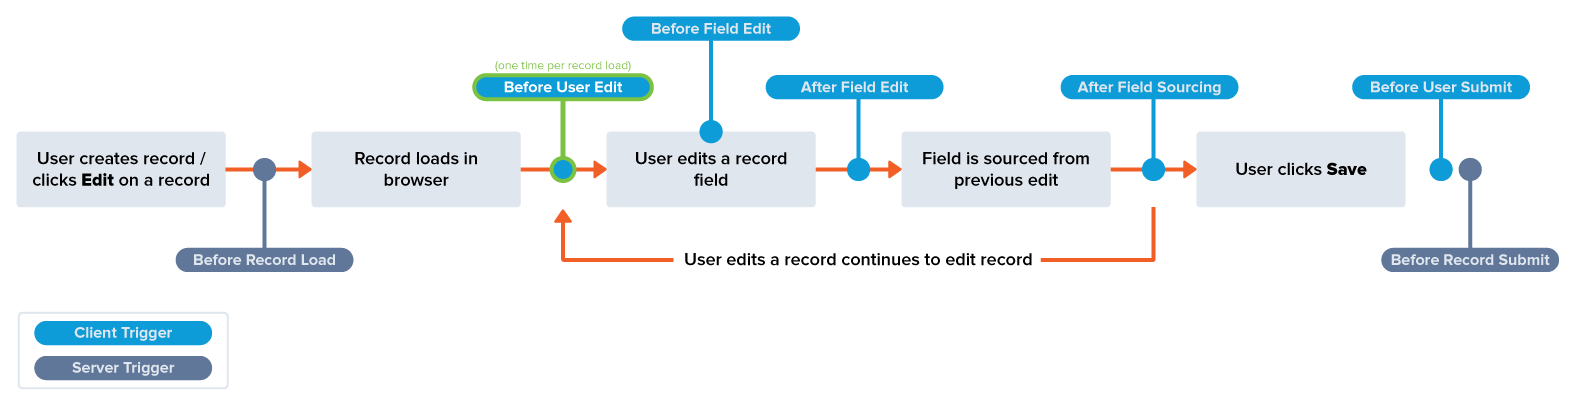 A diagram showing common record edit events and when the Before User Edit trigger executes.